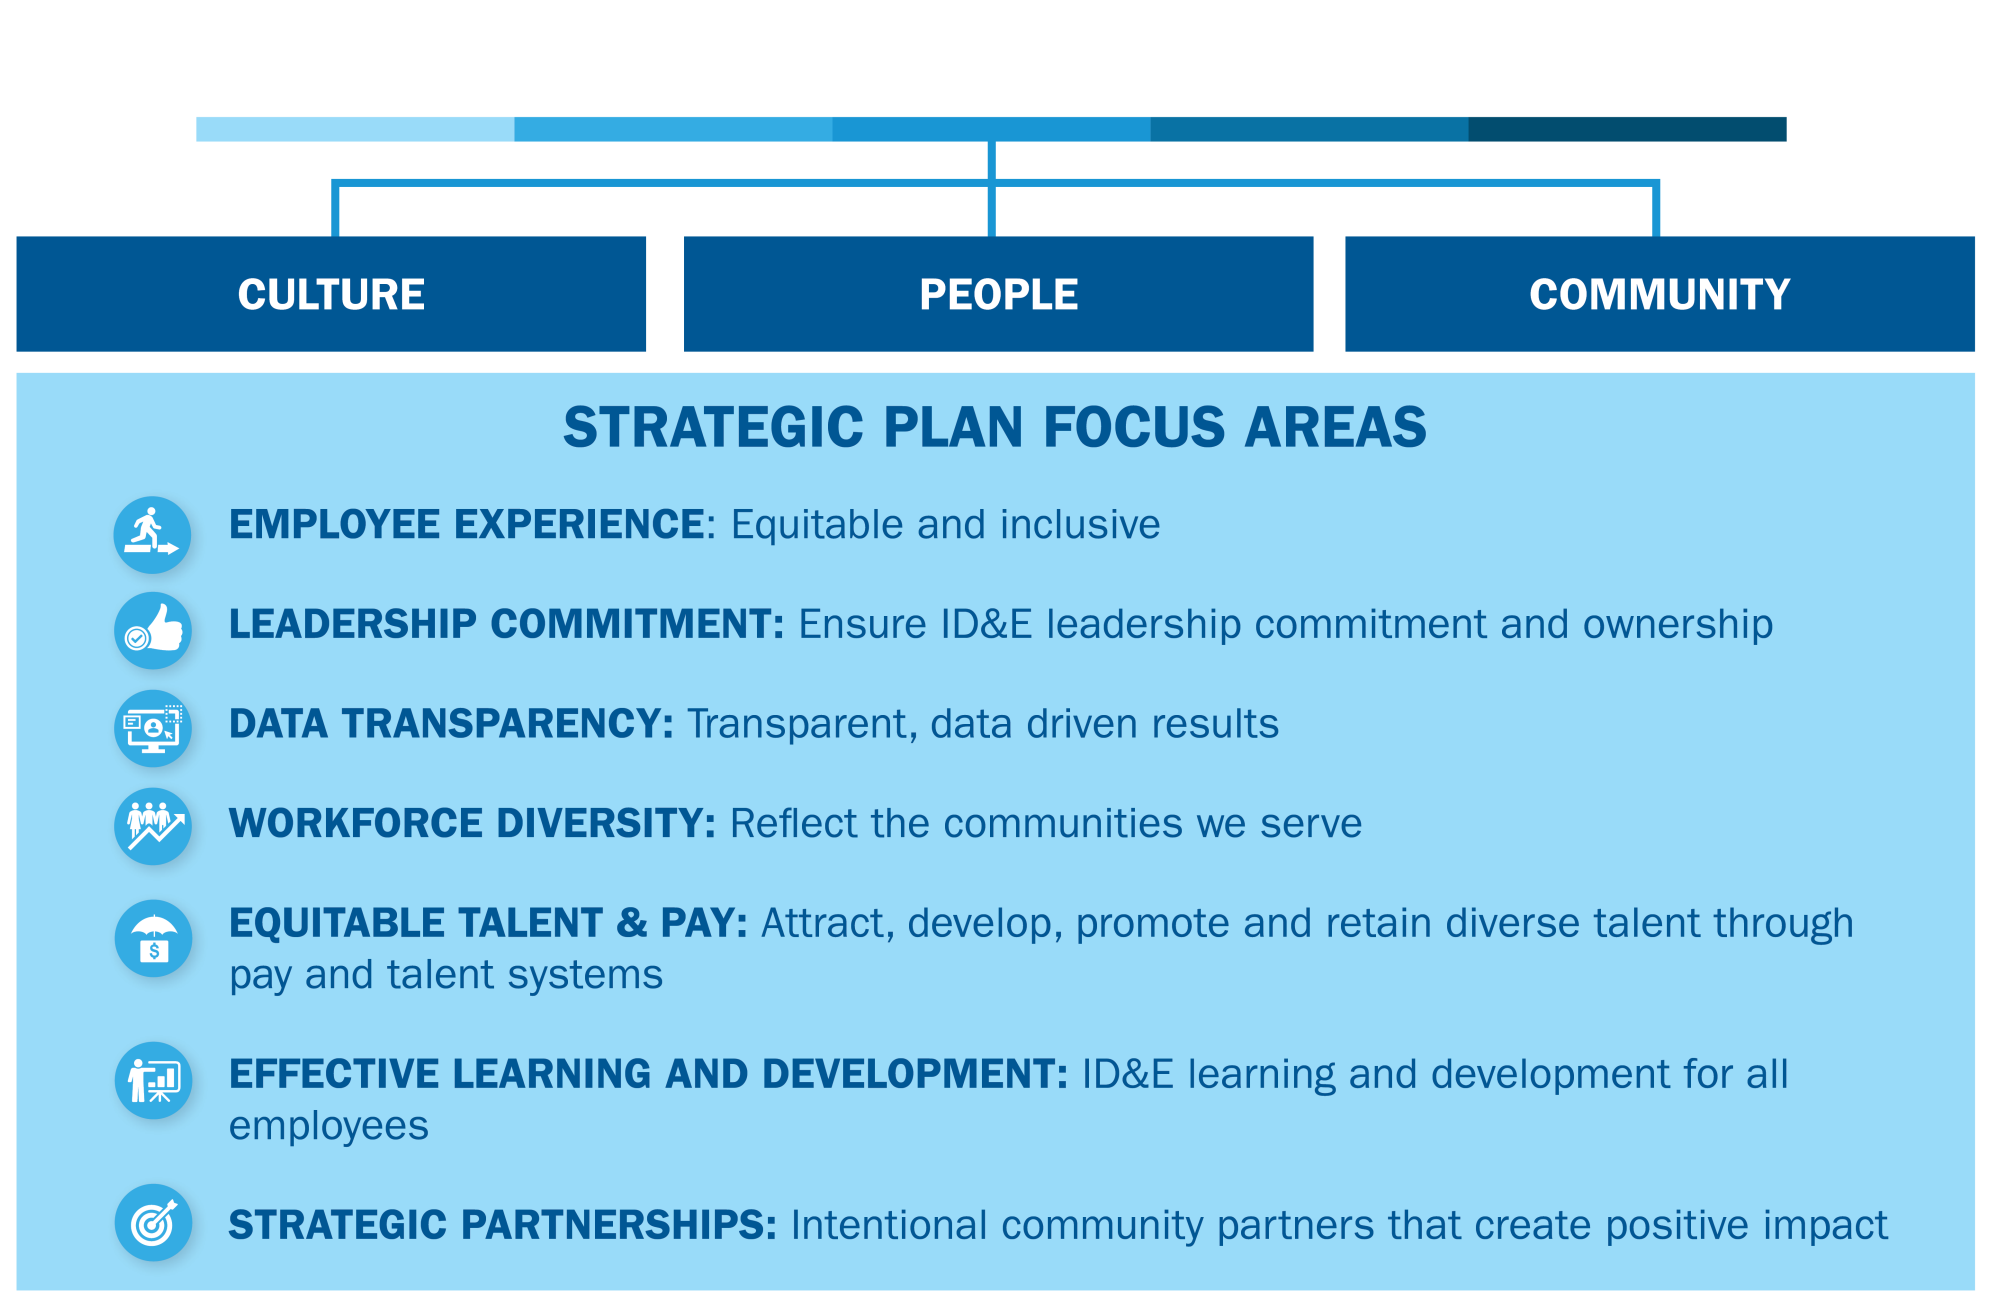 American Water three pillars of Inclusion, Diversity & Equity Strategy